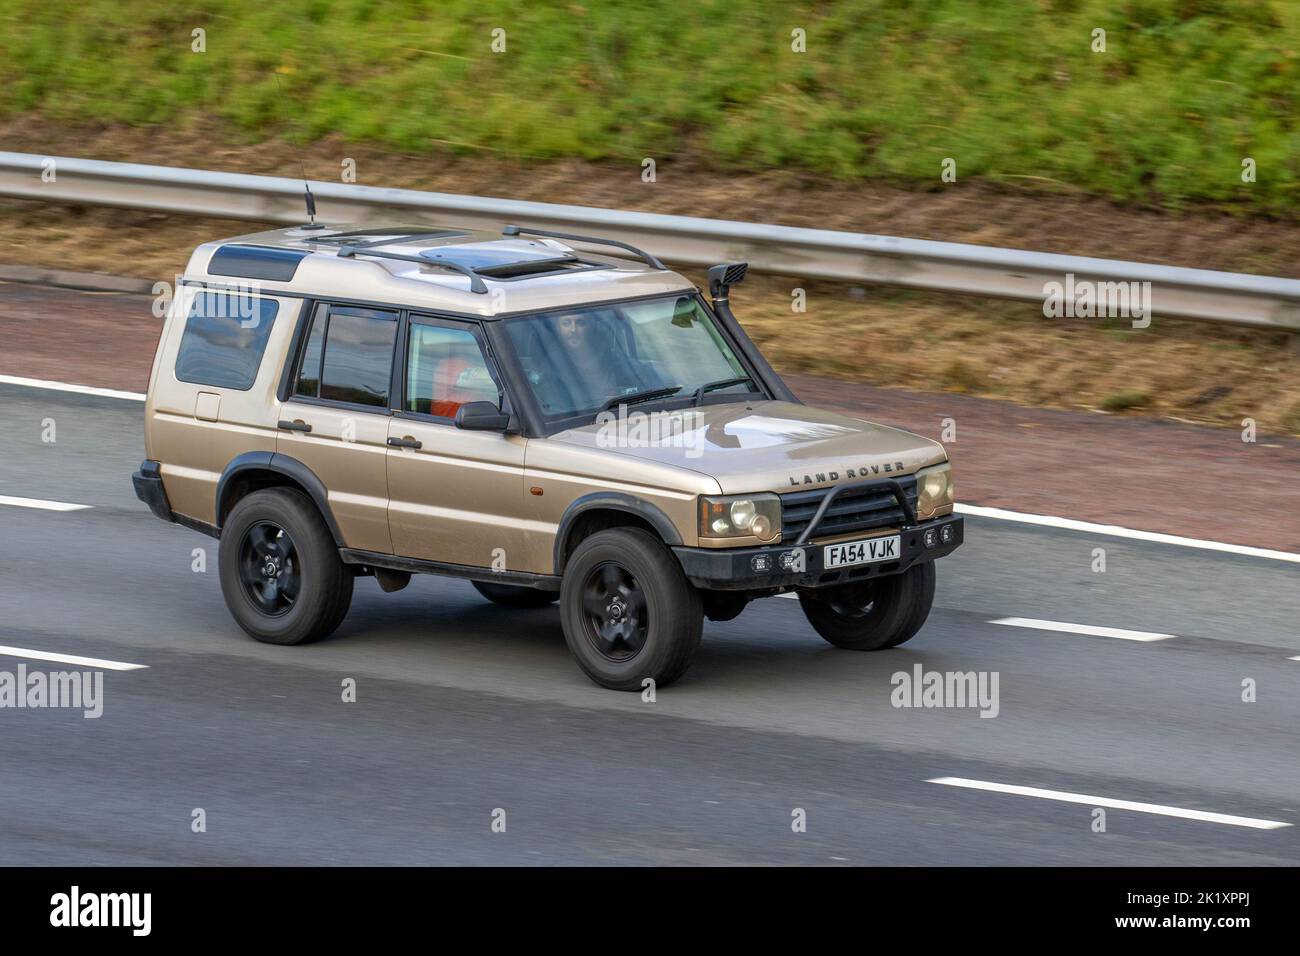 2004 Maya Gold LAND ROVER DISCOVERY 2495cc turbo diesel automatic 5-speed manual; travelling on the M6 motorway UK Stock Photo